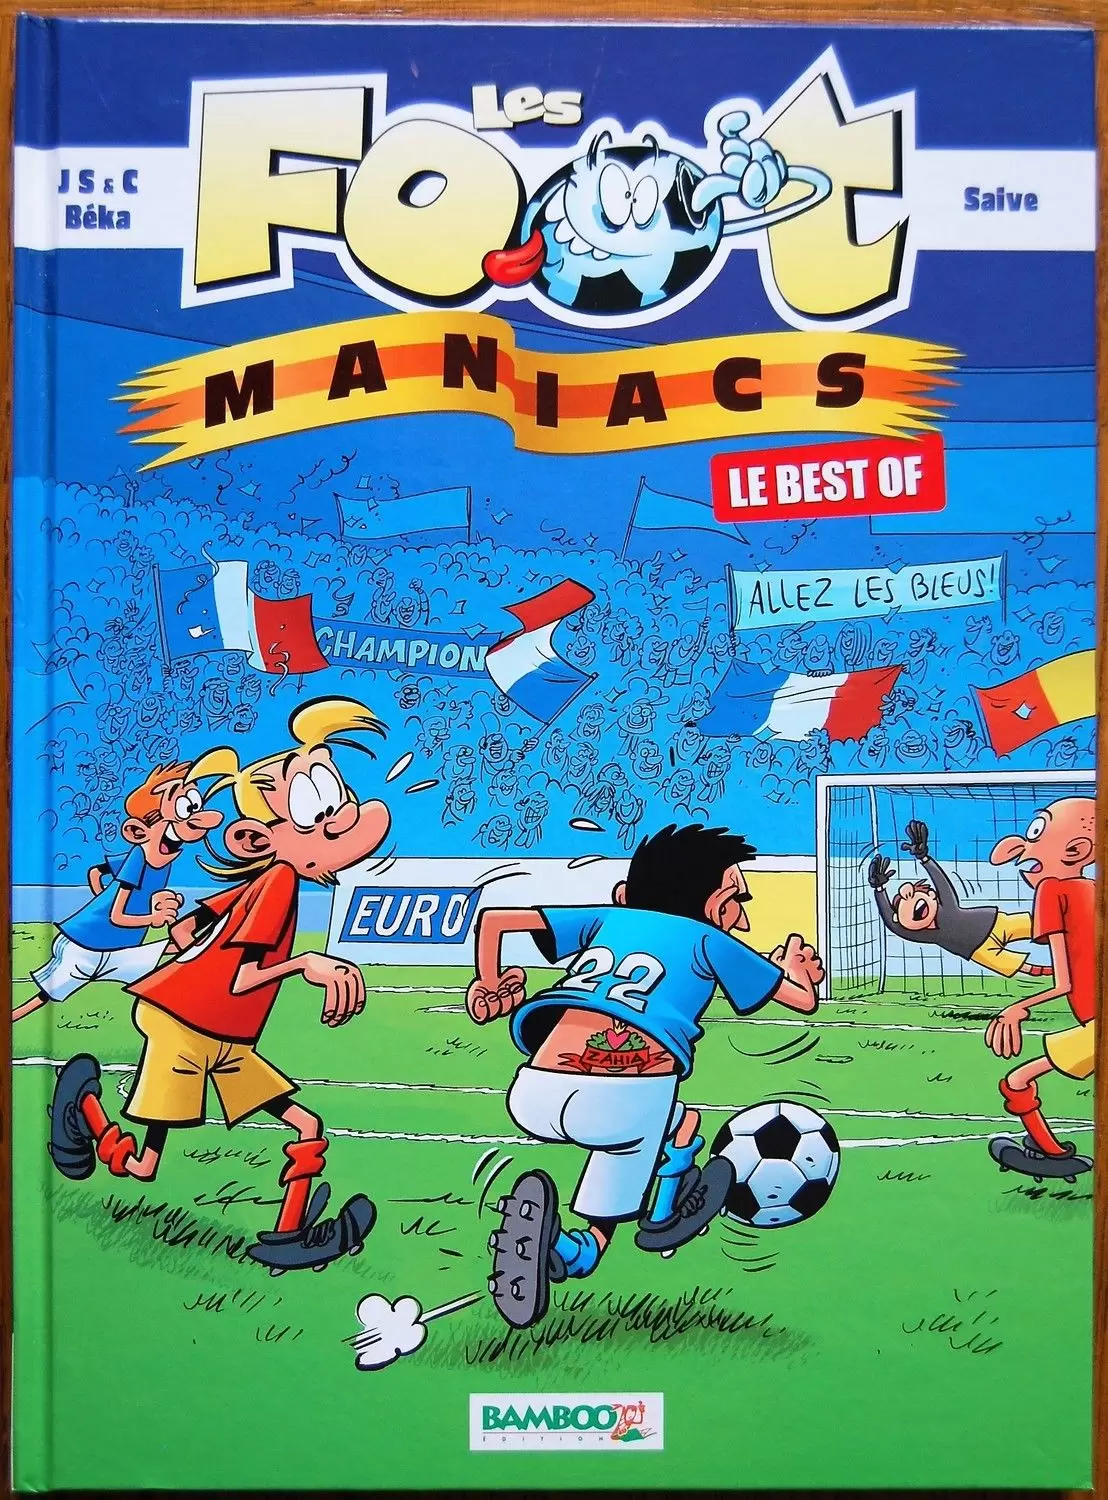 Les Foot Maniacs - Le Best of